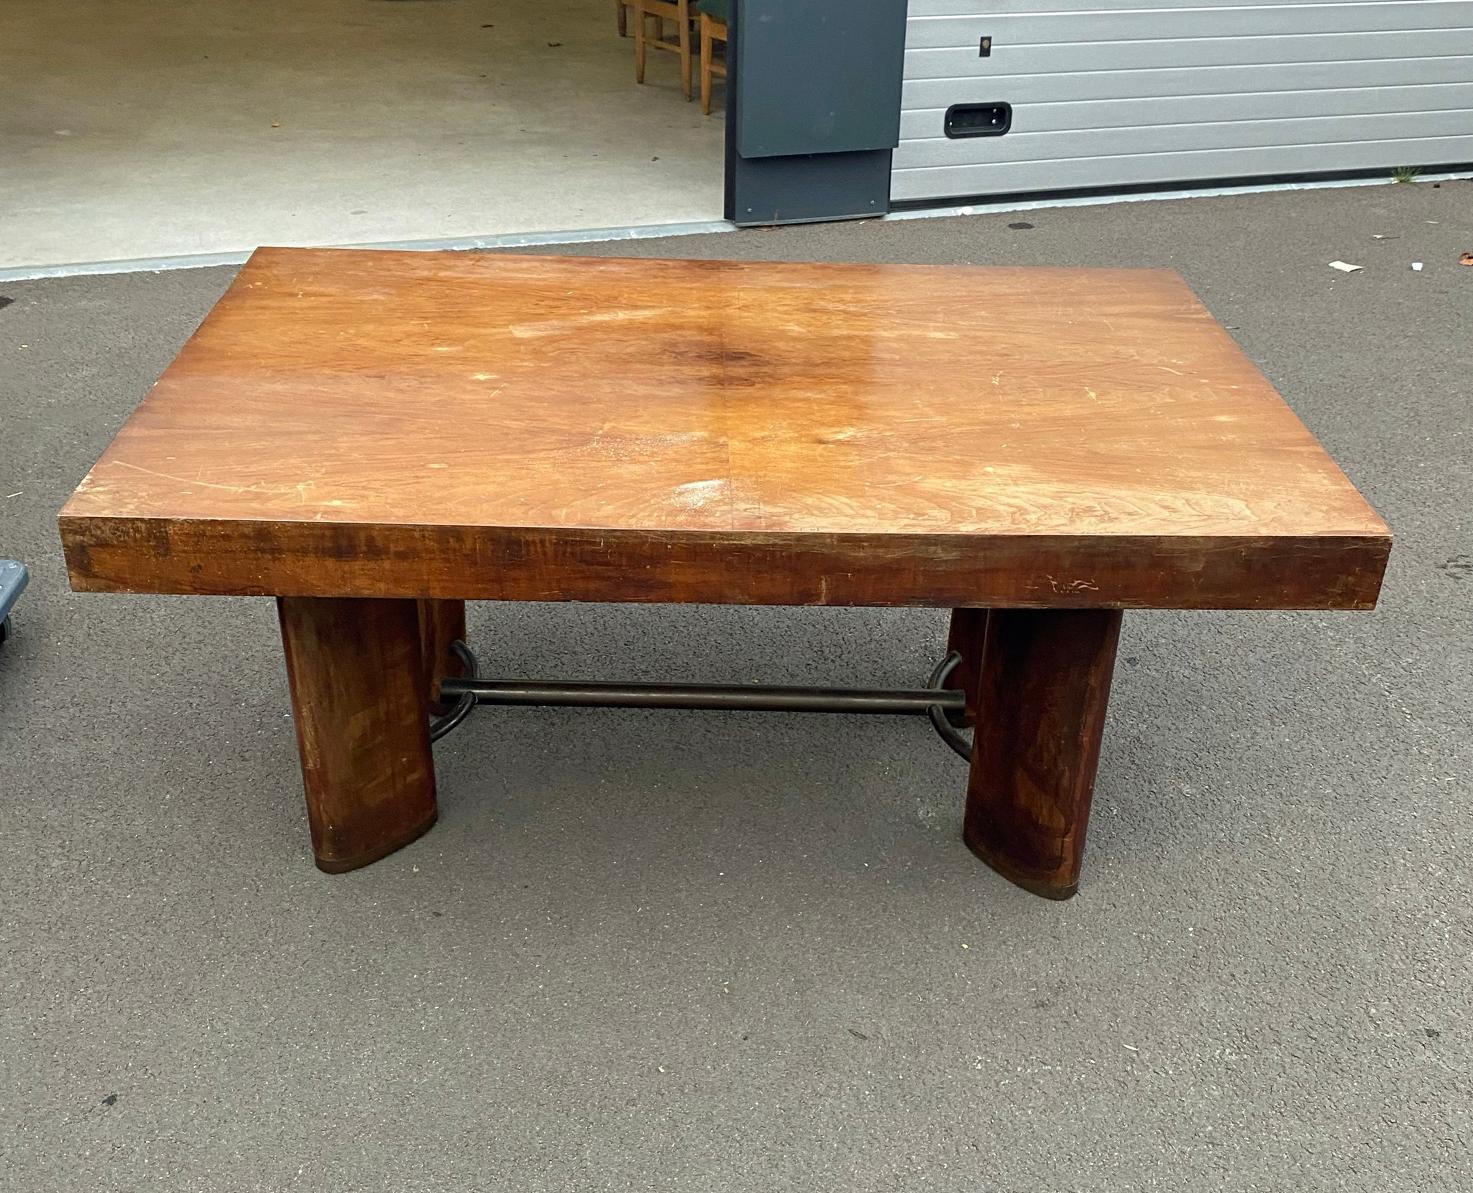 Mid-20th Century Modernist Art Deco Desk or Table in Walnut, Metal Spacer and Shoe, circa 1930 For Sale